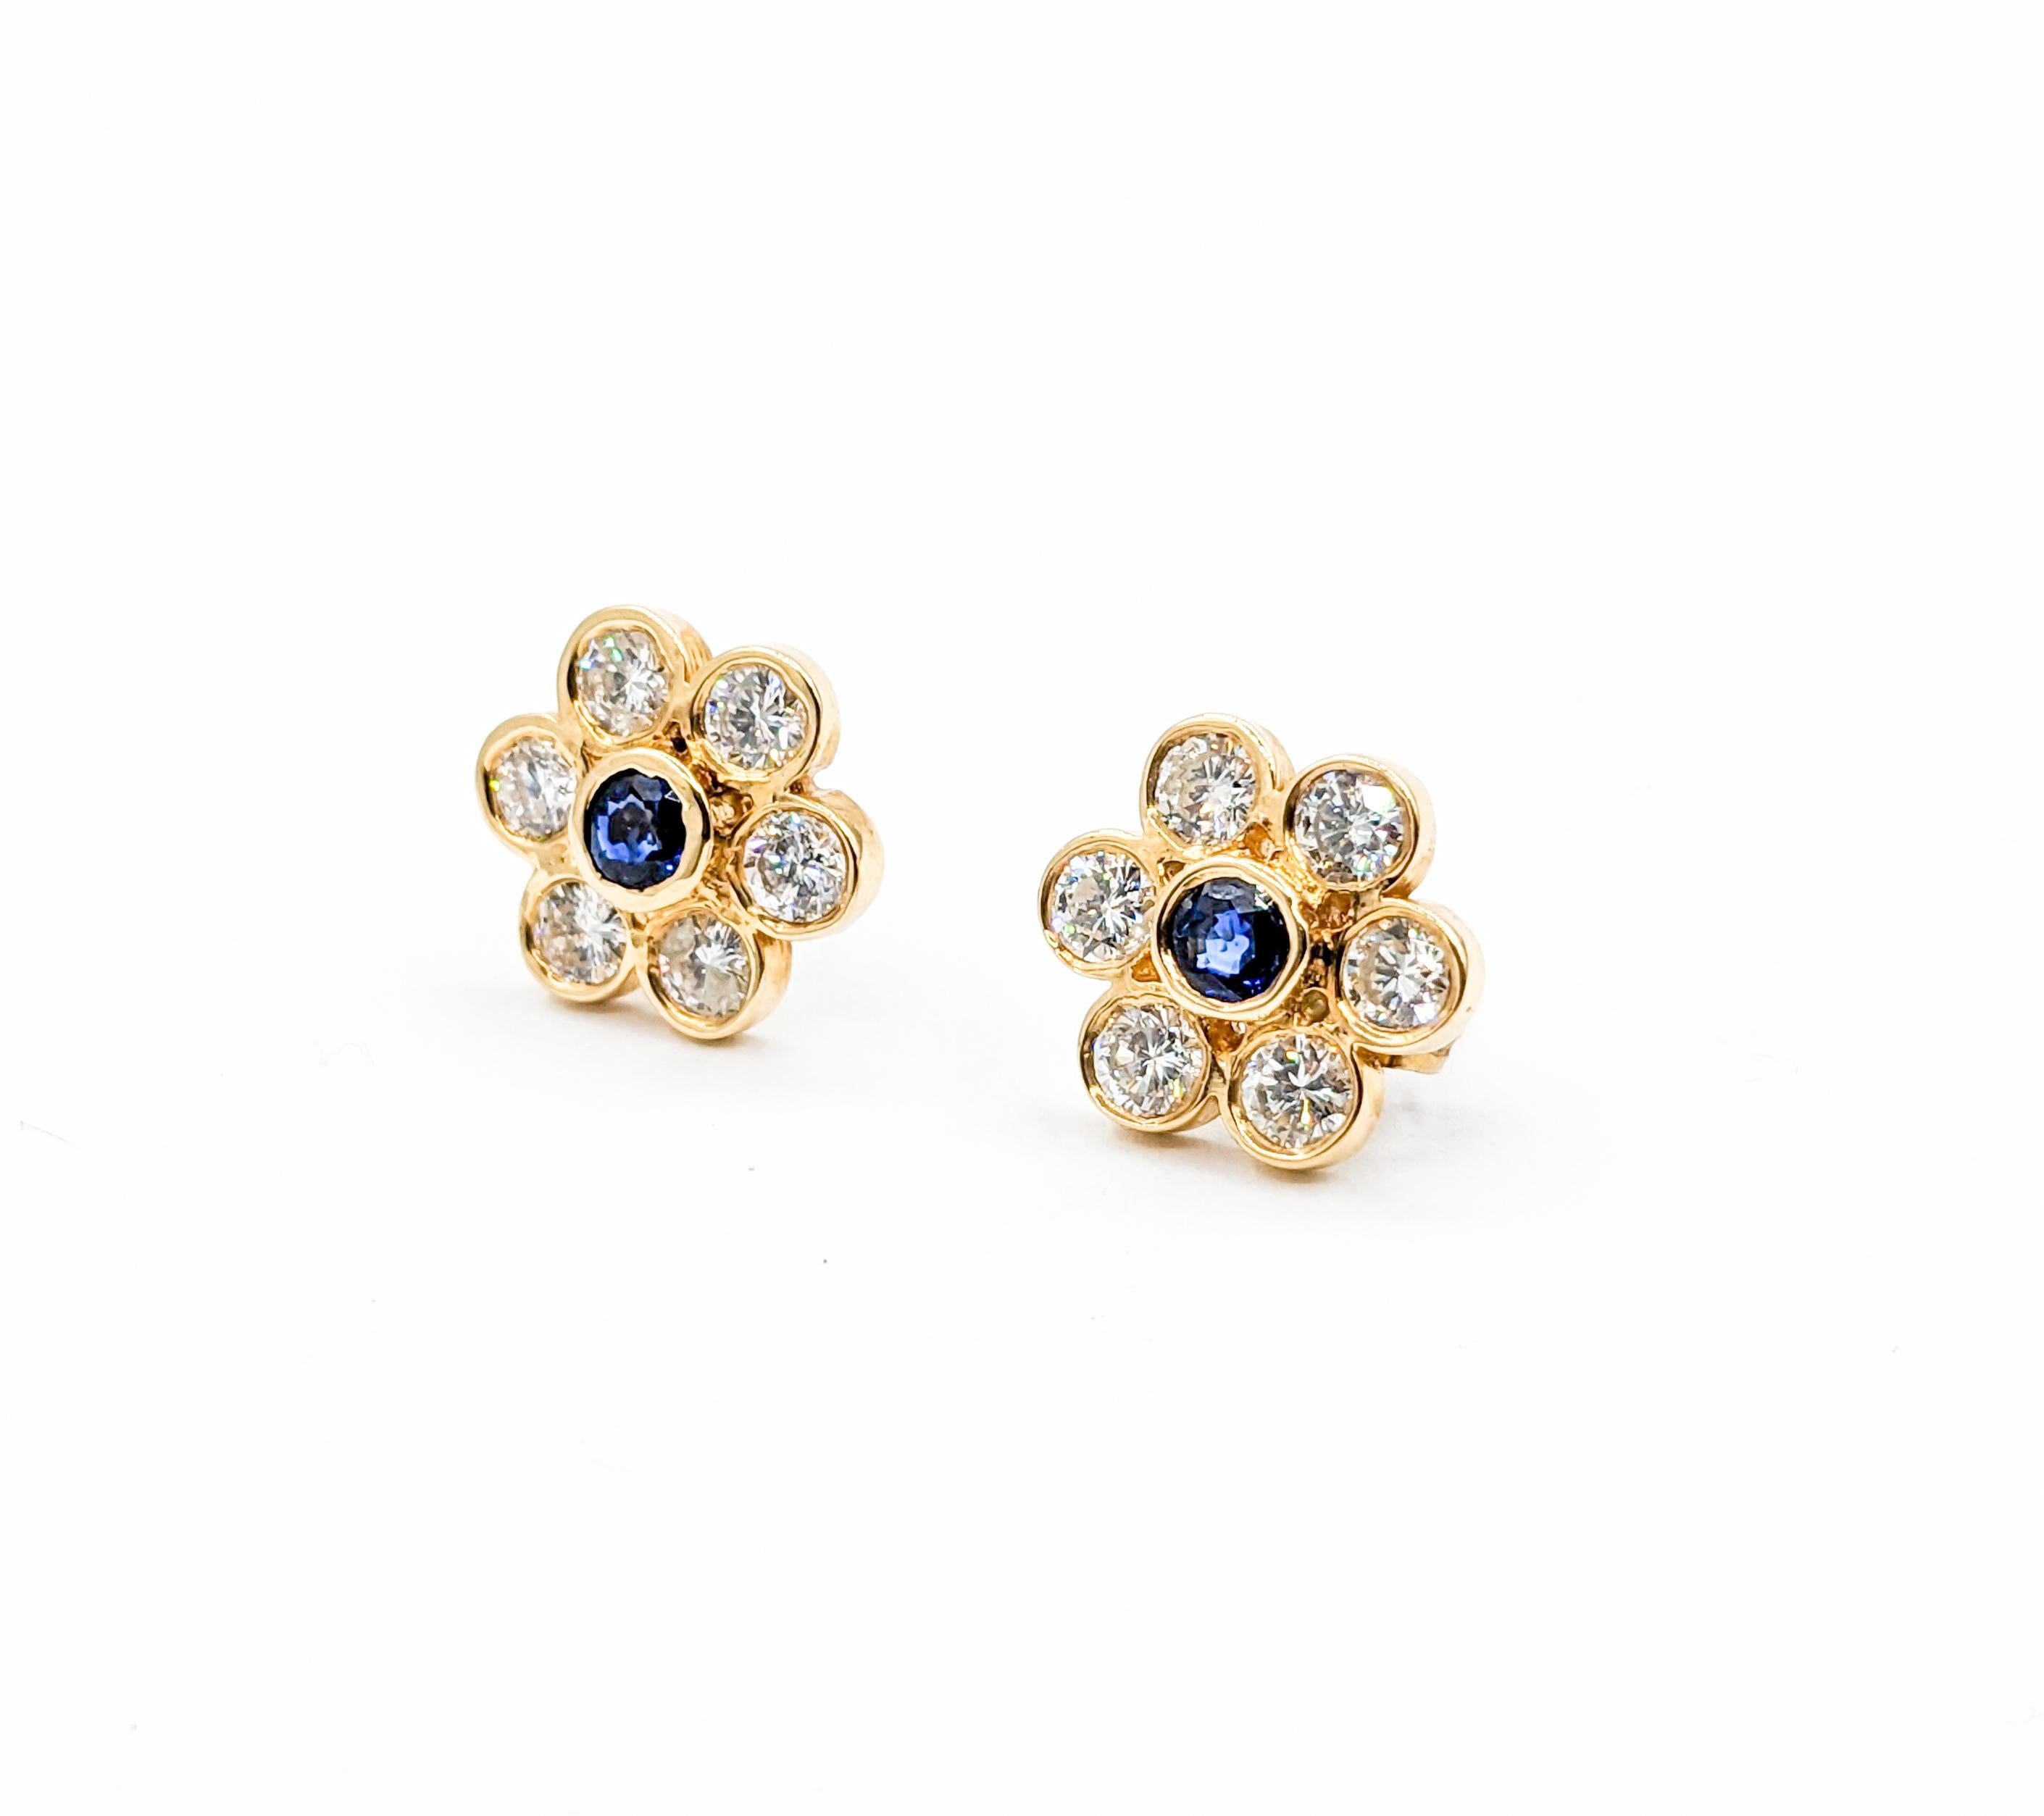 Vintage Diamond & Sapphire Floral Stud Earrings

Illuminate any ensemble with these radiant flower shaped diamond and sapphire earrings. Expertly crafted in 14k yellow gold, they showcase .42ctw of round-cut sapphires in a deep blue hue. The center